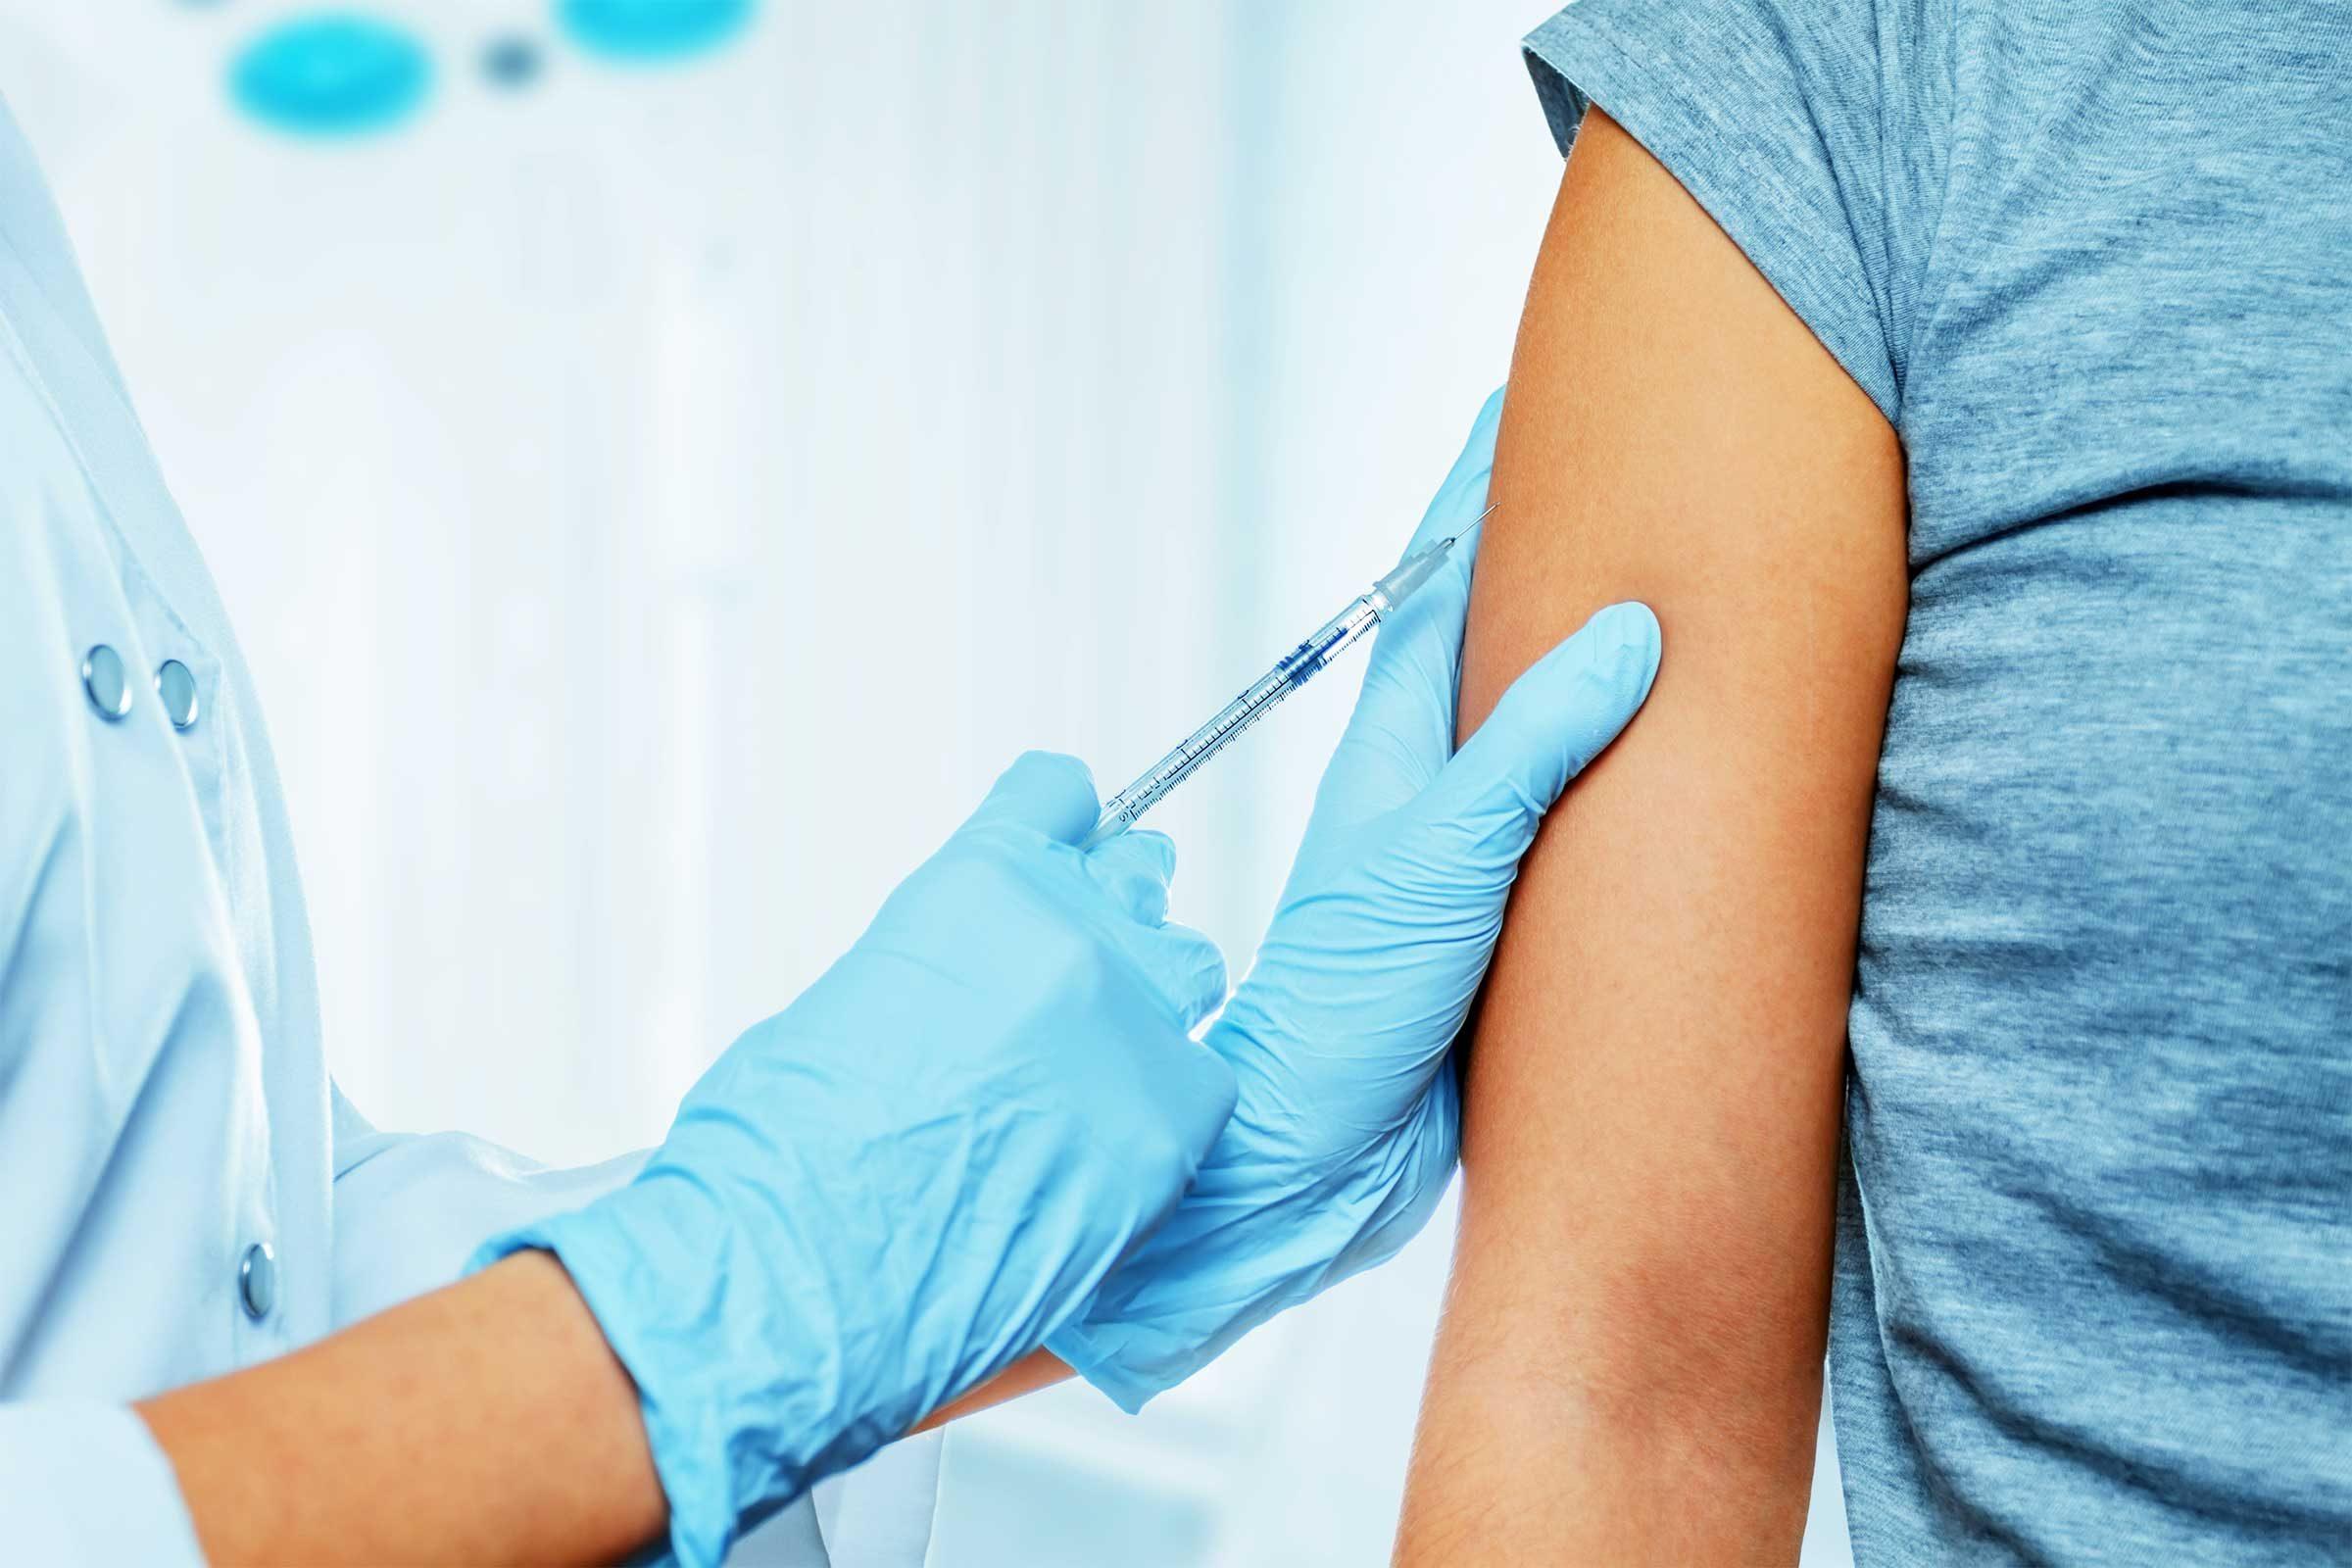 10 Myths About HPV That Could Damage Your Health